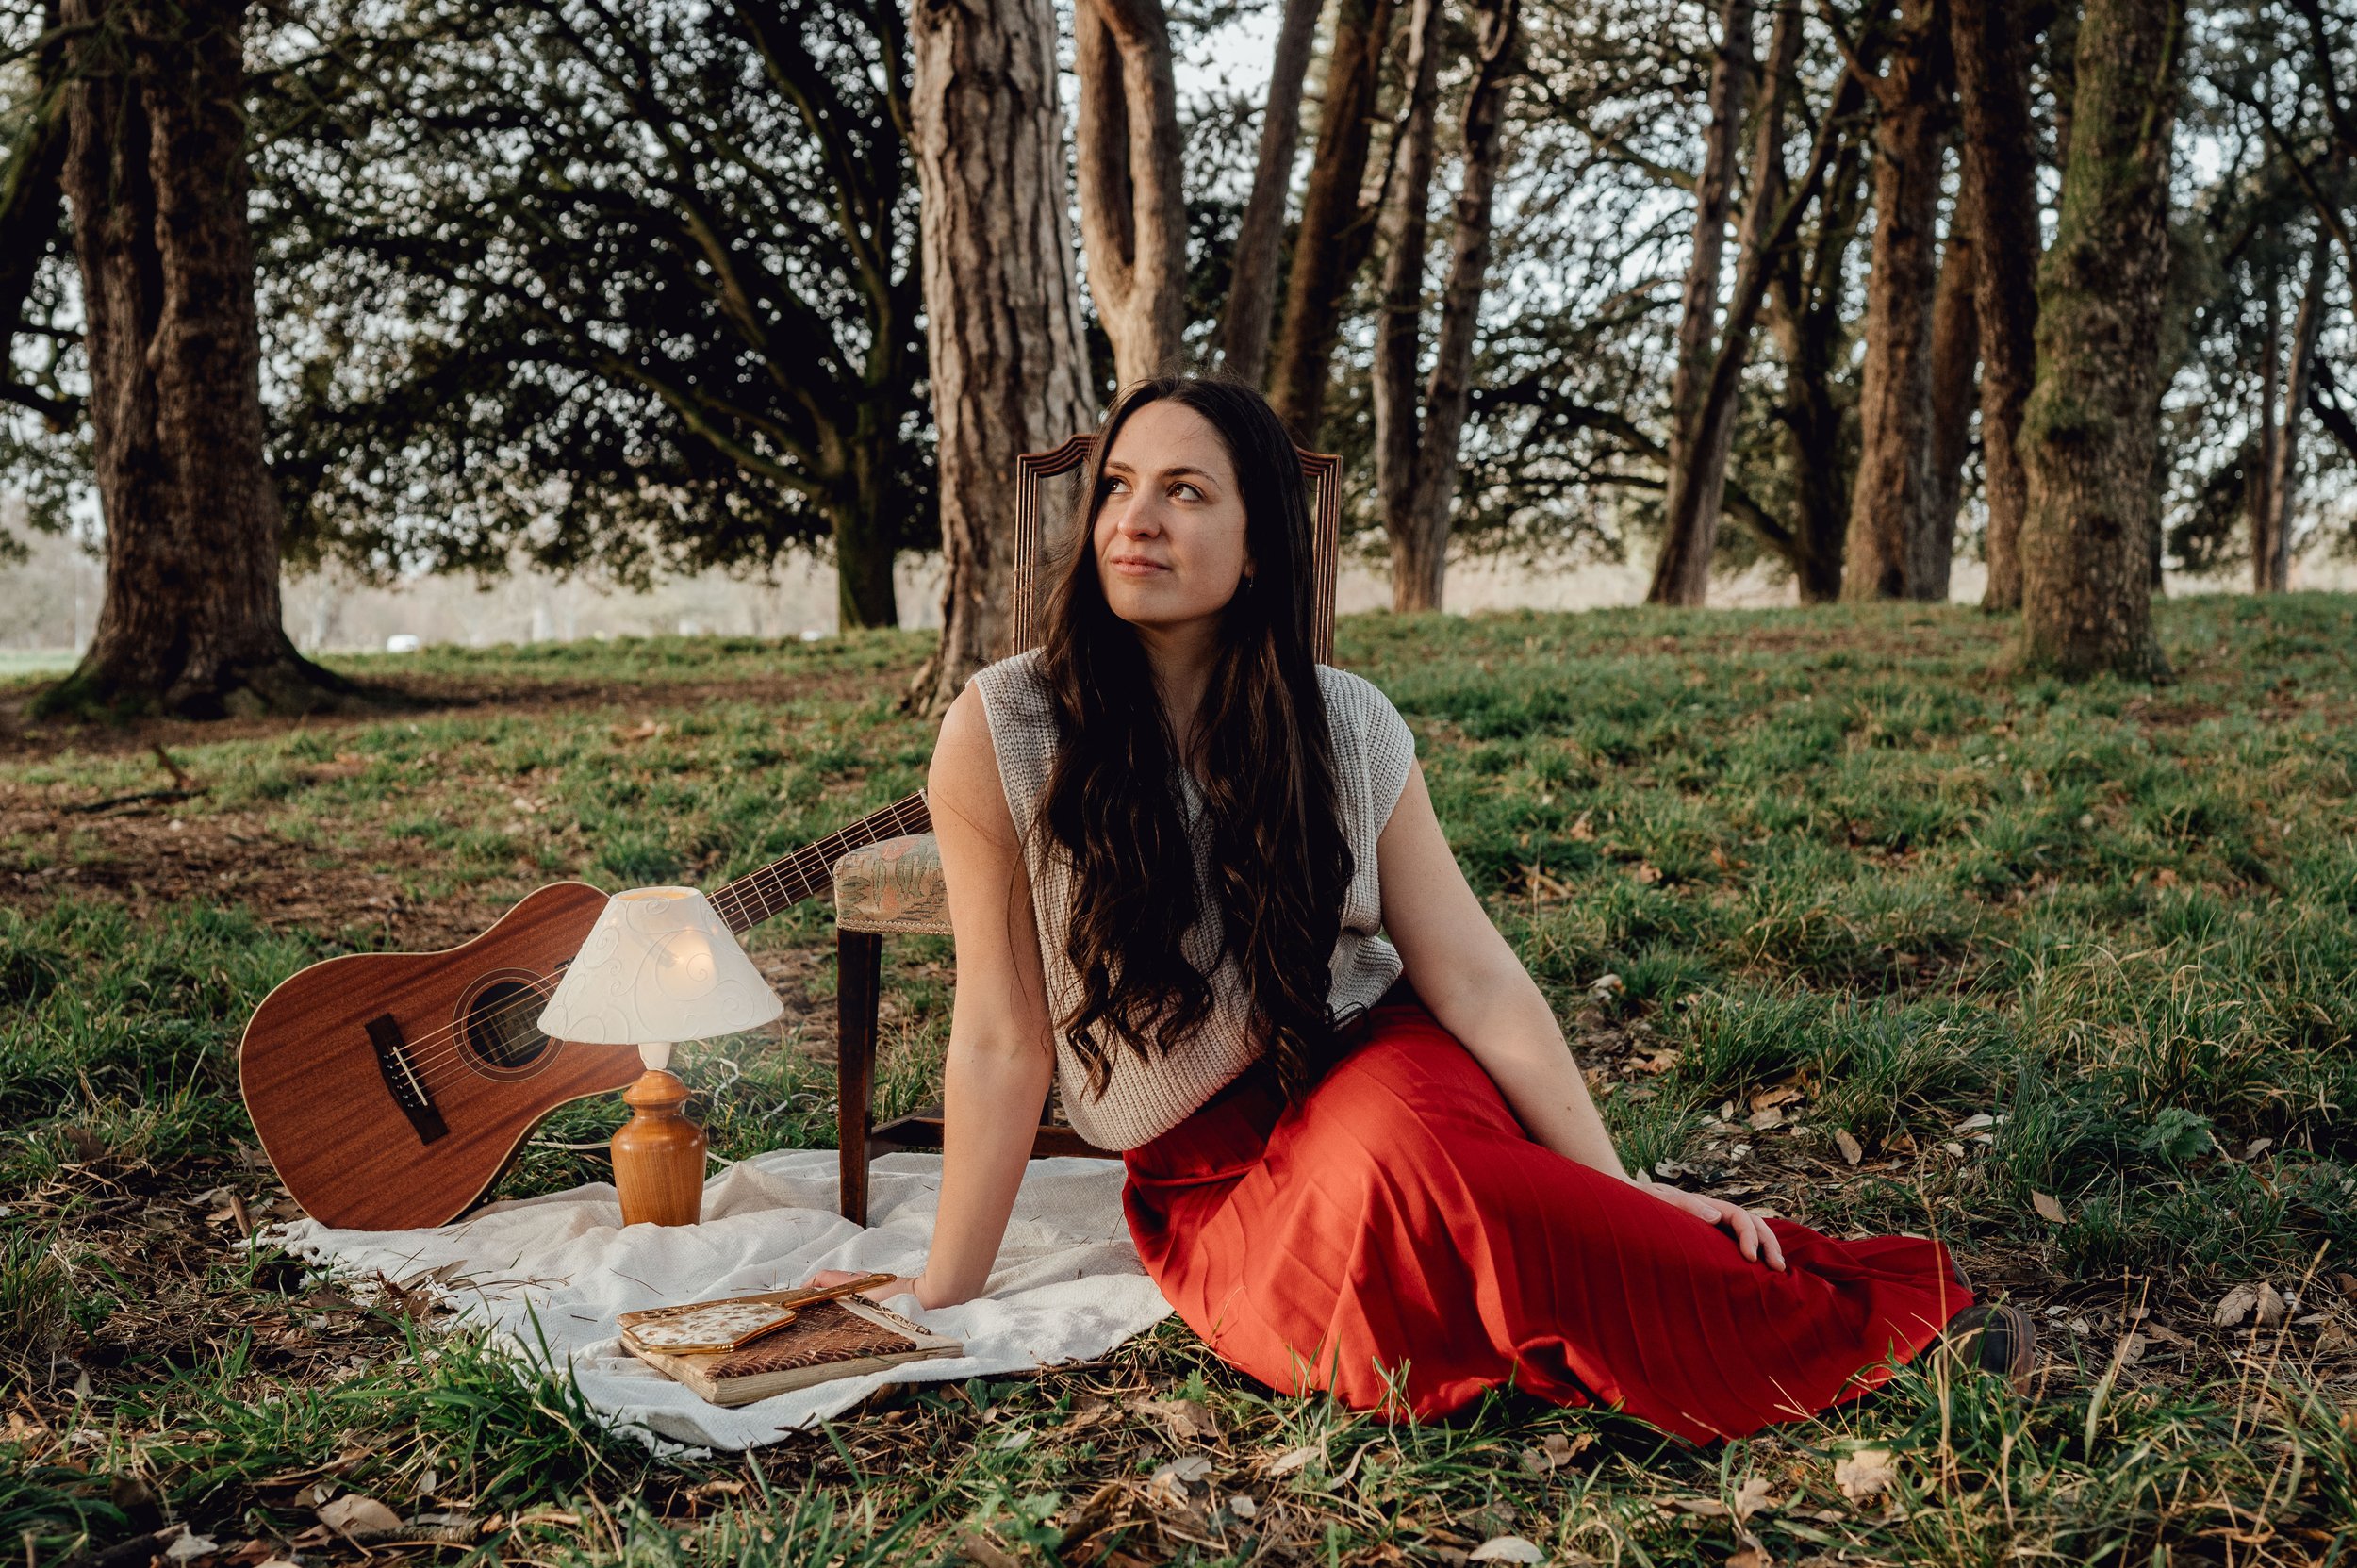 Tales from a Traveling Songstress: Claire Hawkins' "Bad" Debut